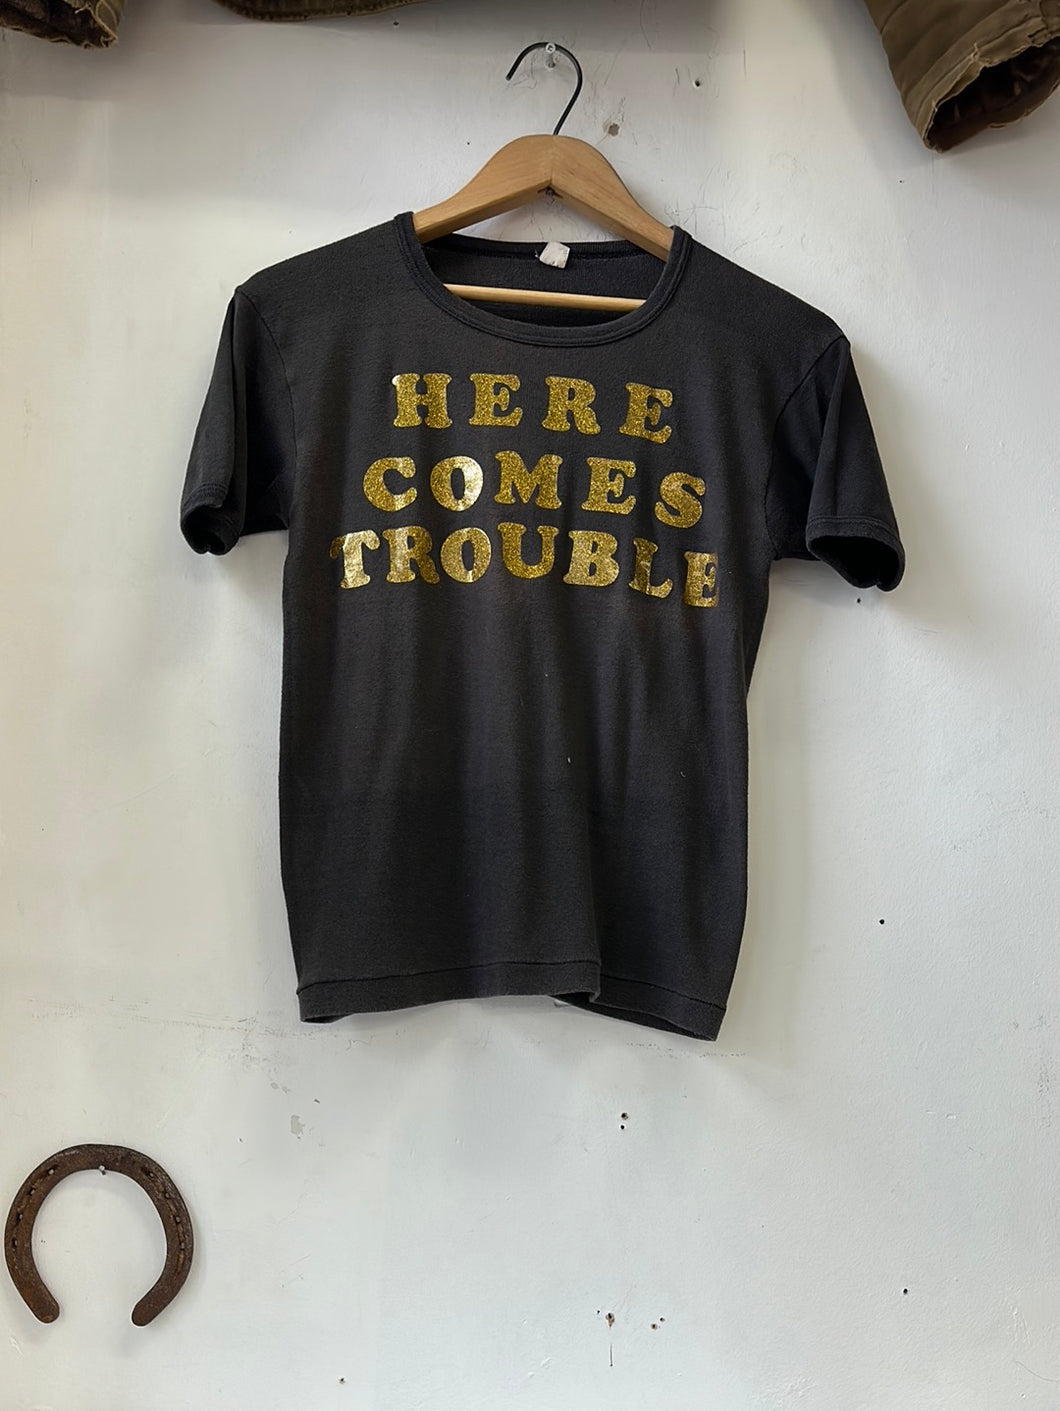 1970s “Here Comes Trouble” Tee